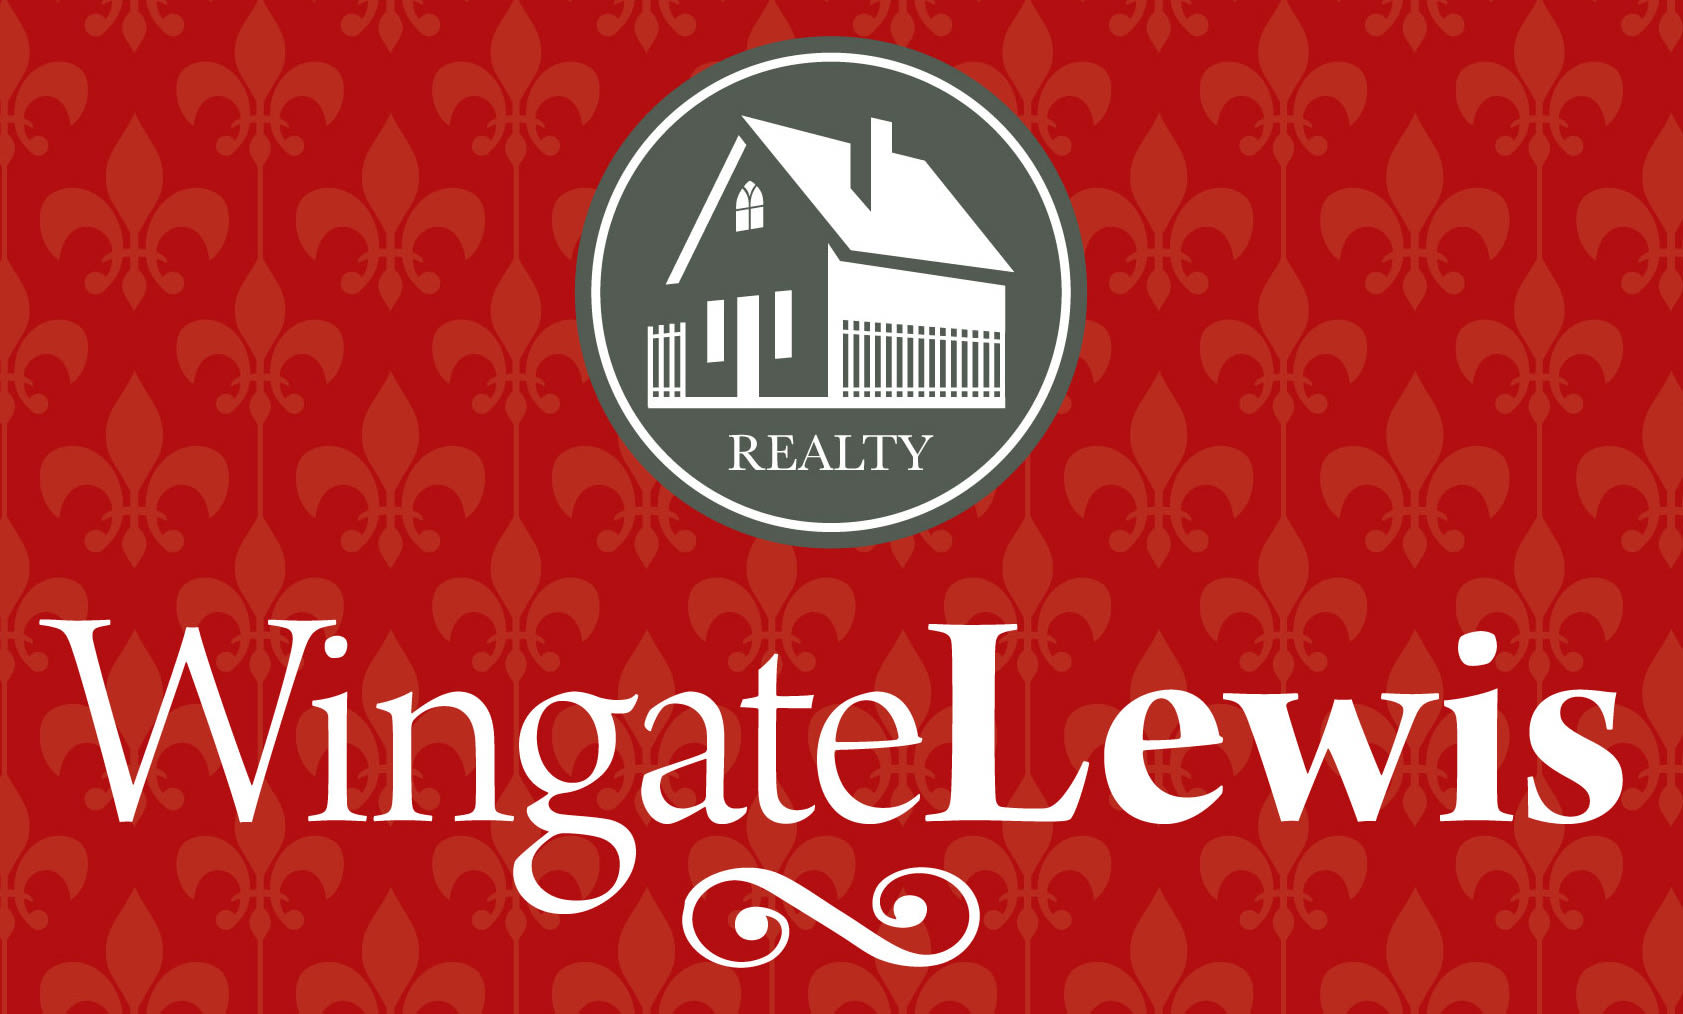 Wingate Lewis Realty